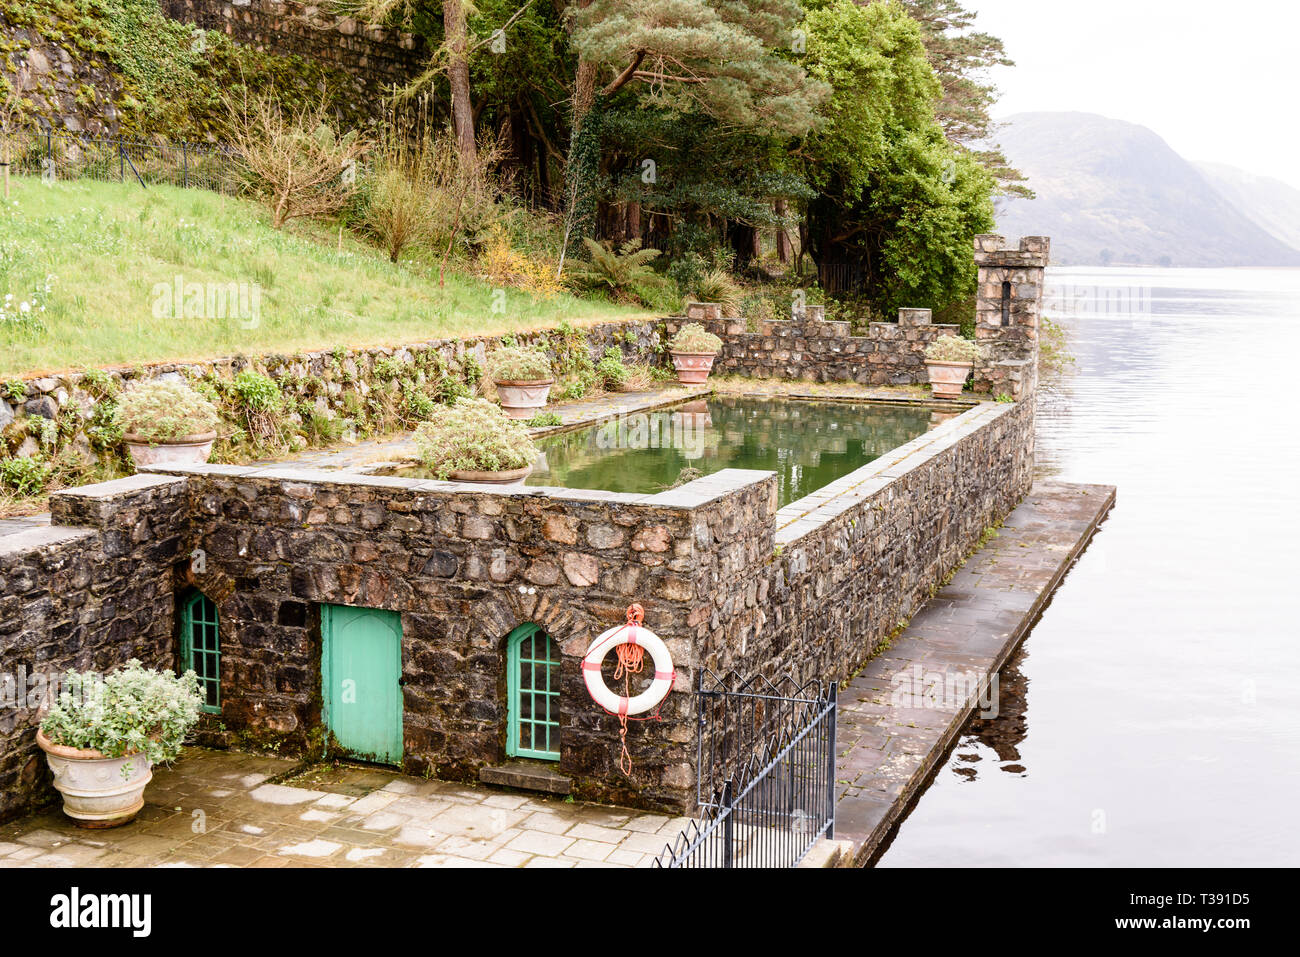 Beheizter Pool im Glenveagh Castle, Lough Beagh, County Donegal, Irland Stockfoto